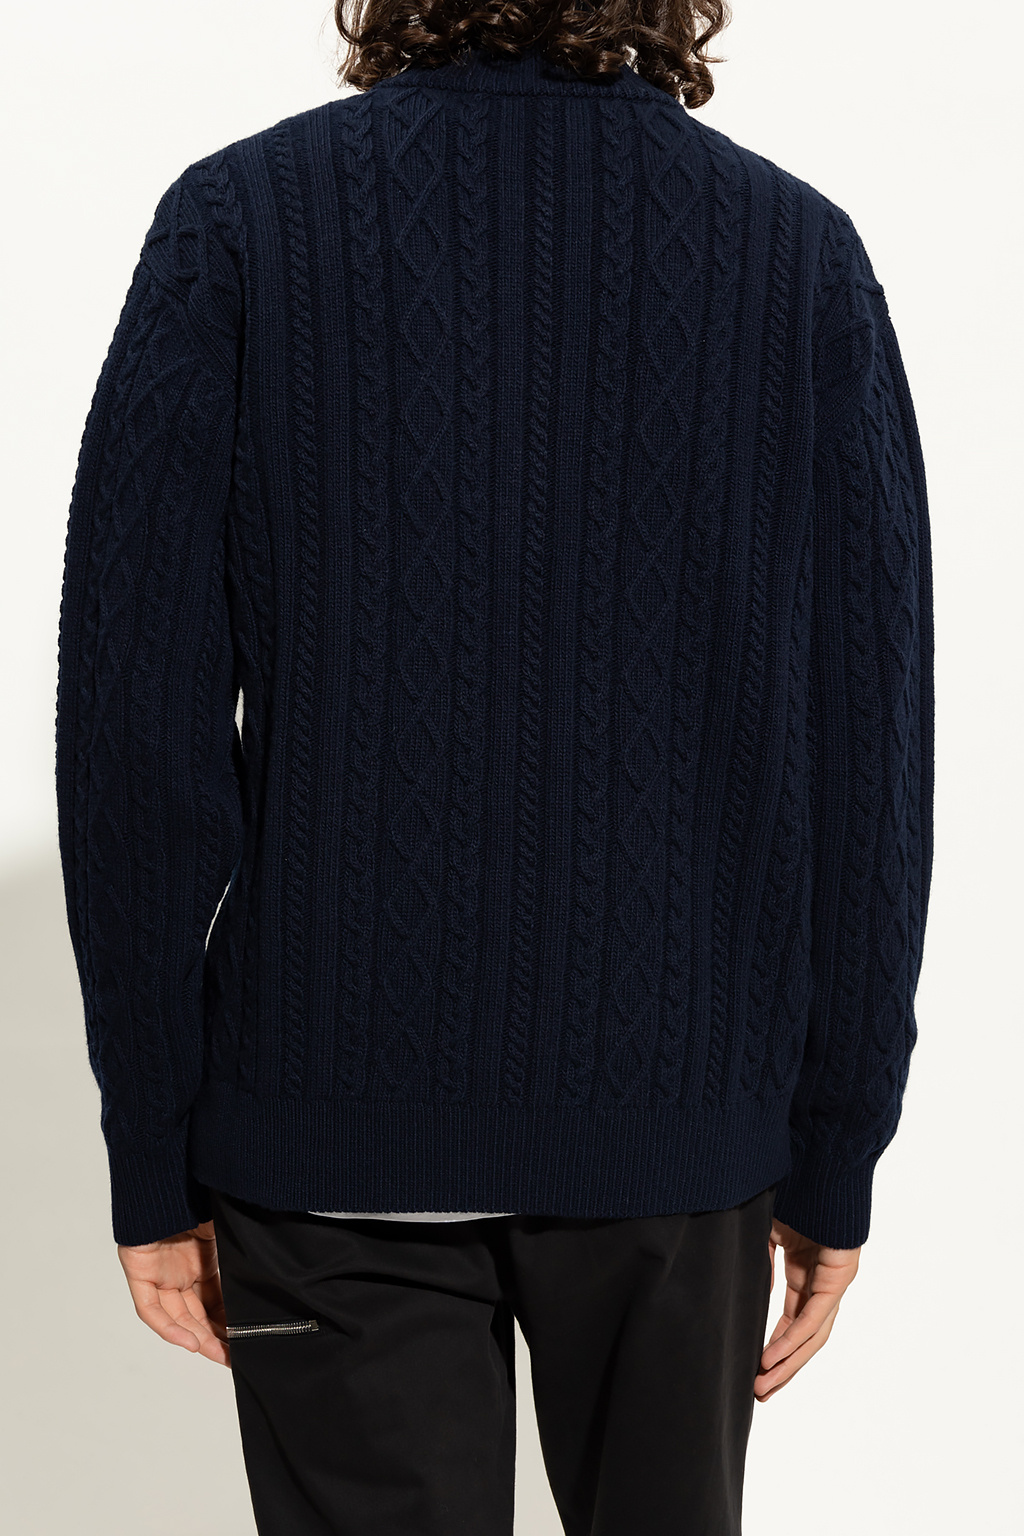 Moncler Wool sweater with high collar